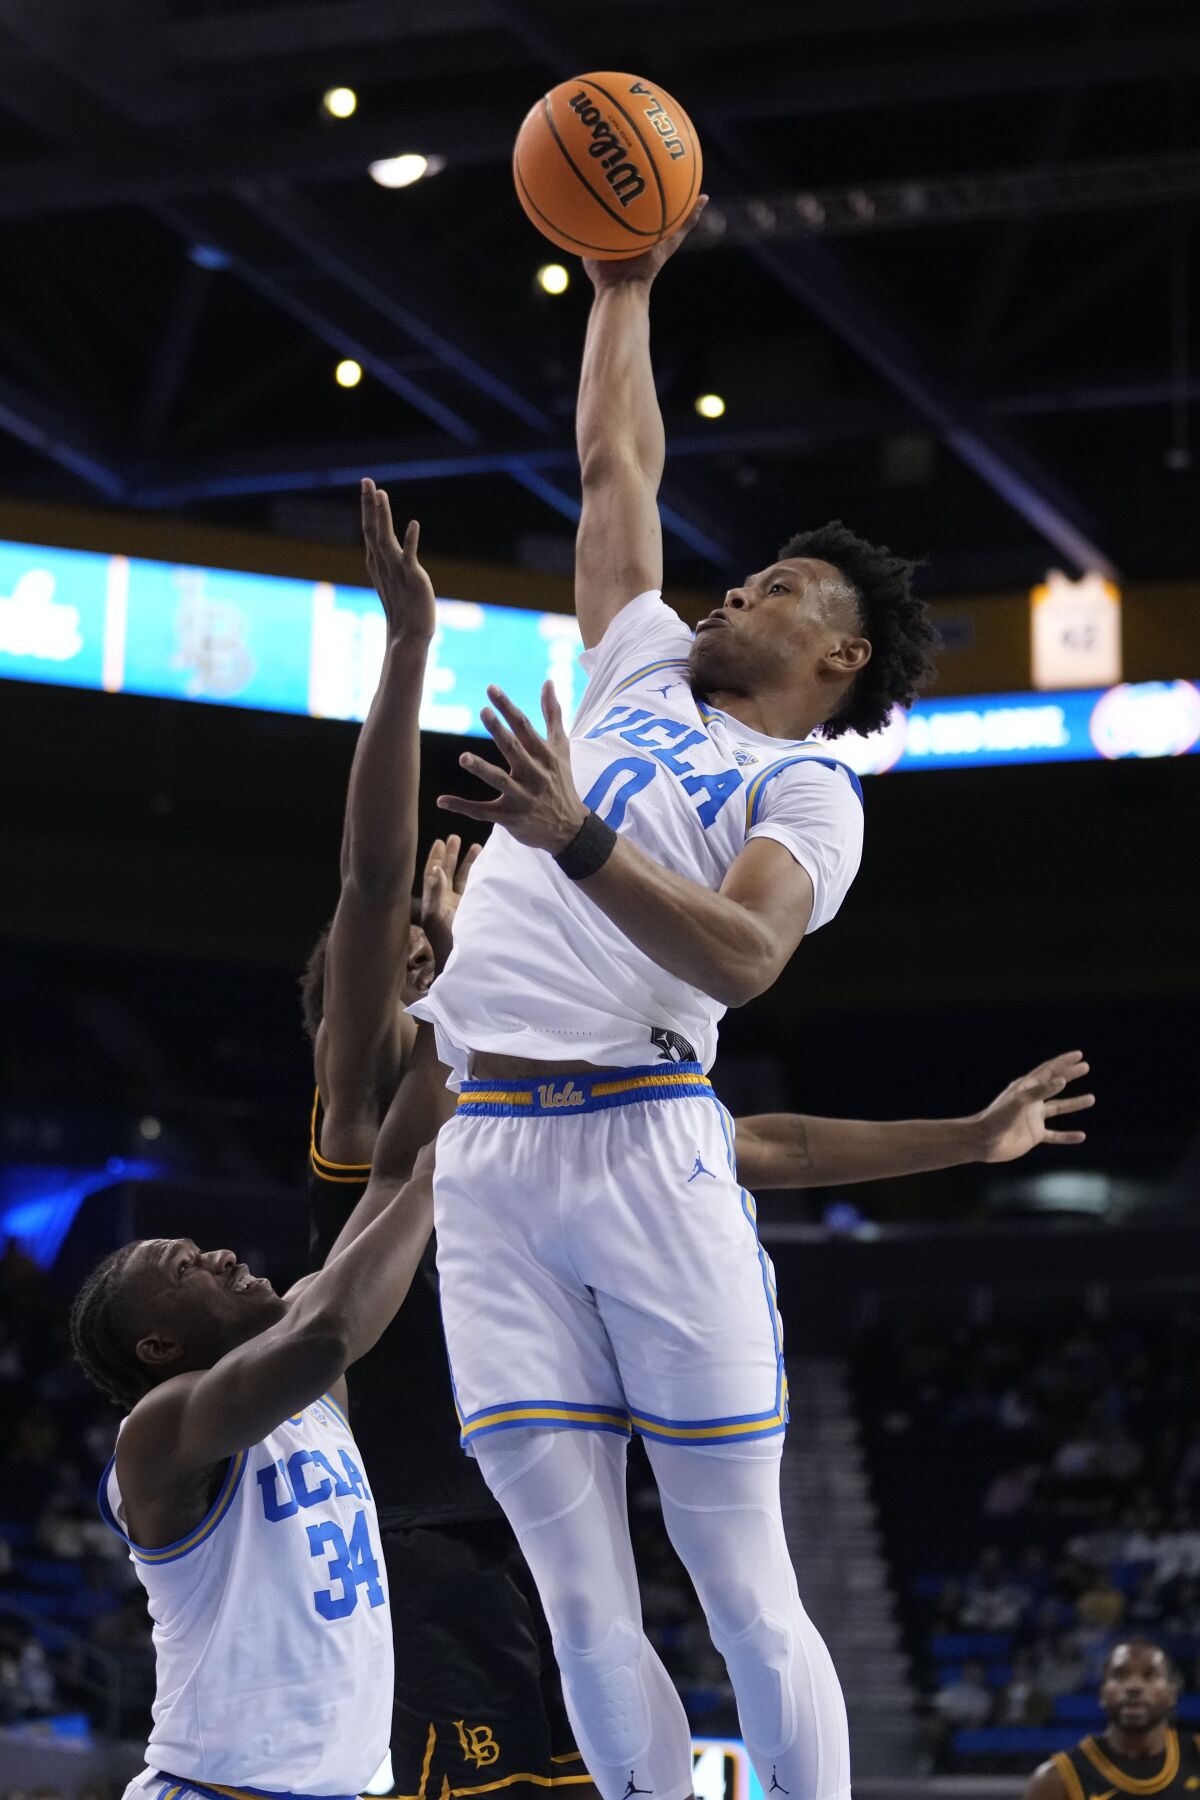 The Bruins' Jaylen Clark (0) grabs a rebound during the first half against Long Beach State on Nov. 11, 2022.